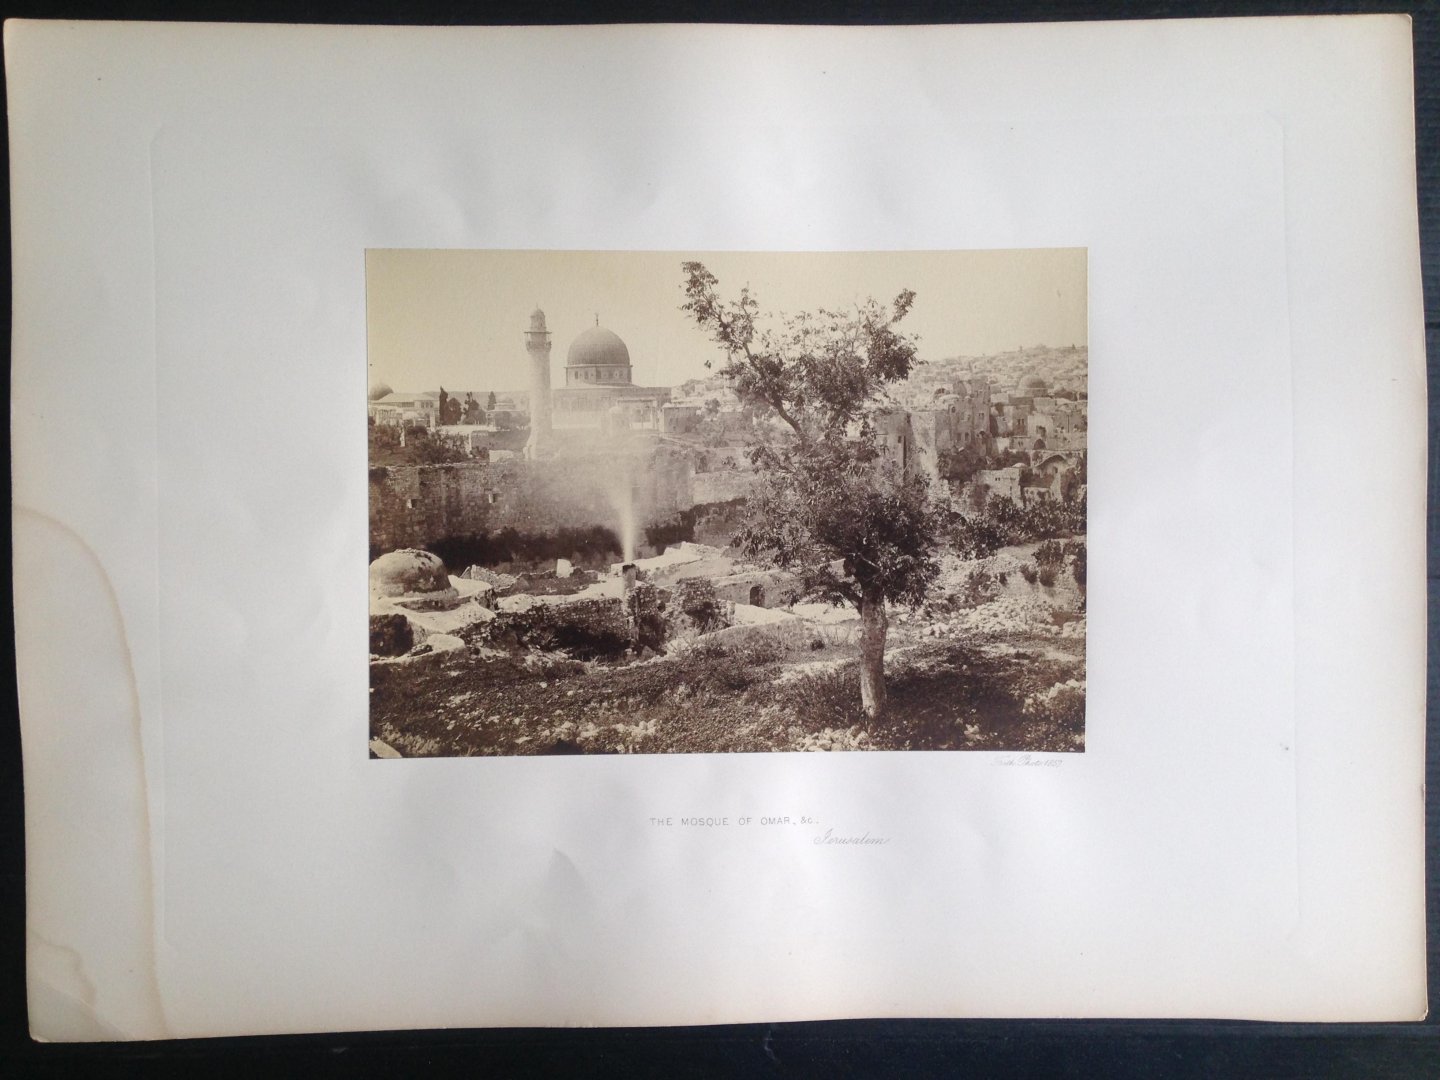 Frith, Francis - The Mosque of Omar, & c., Jerusalem, Series Egypt and Palestine